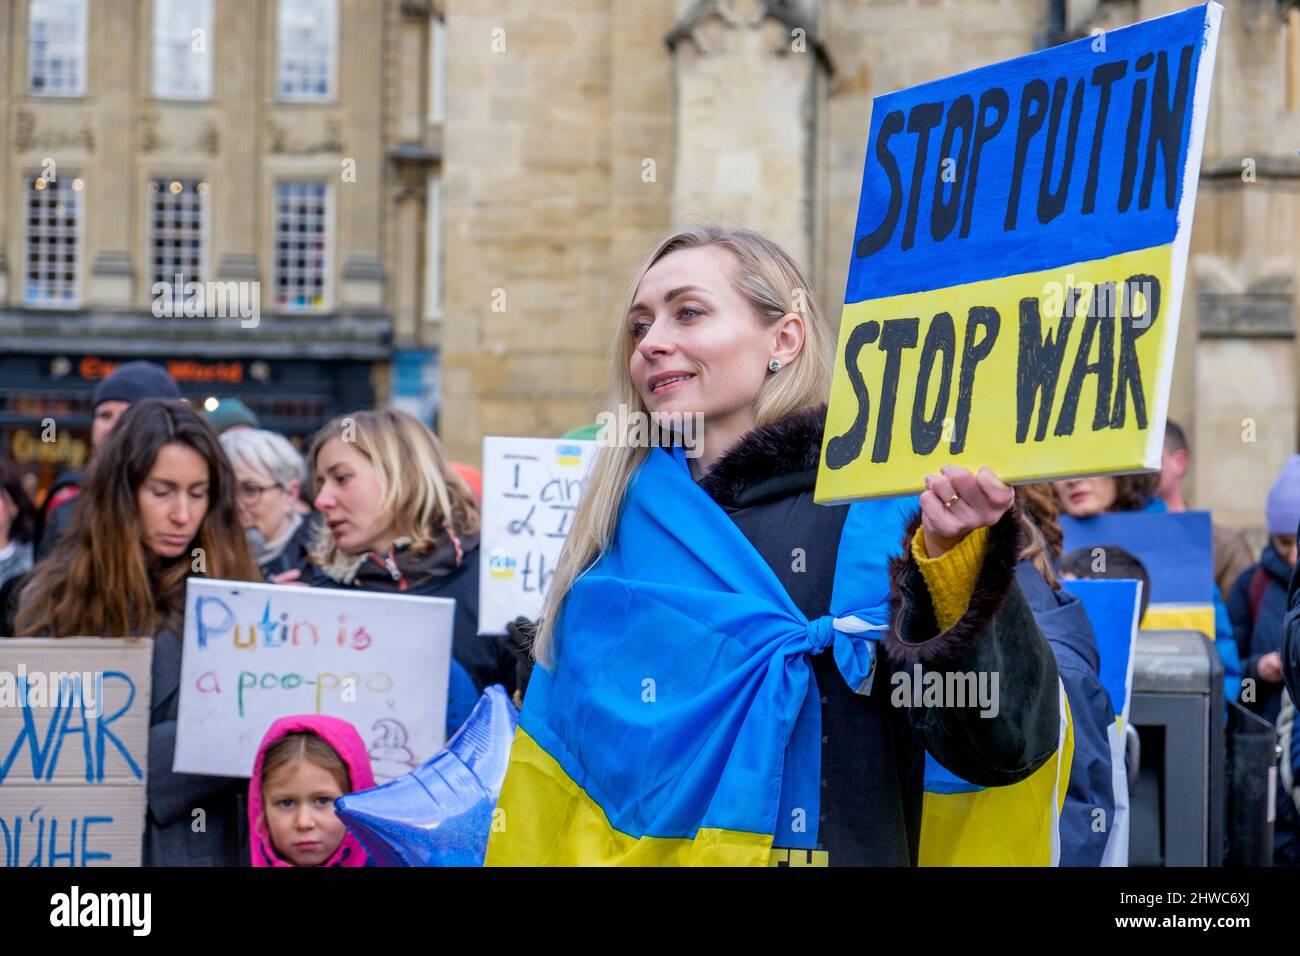 Bath, UK. 5th March, 2022. A woman draped in the Ukrainian flag holds an anti-Putin / stop the war placard as she listens to speeches in front of Bath Abbey during a demonstration against Russia's invasion of Ukraine. The demonstration was organised in order to allow local people to show their solidarity with Ukraine in the Russia-Ukraine war and to condemn Putin's actions. Credit: Lynchpics/Alamy Live News Stock Photo